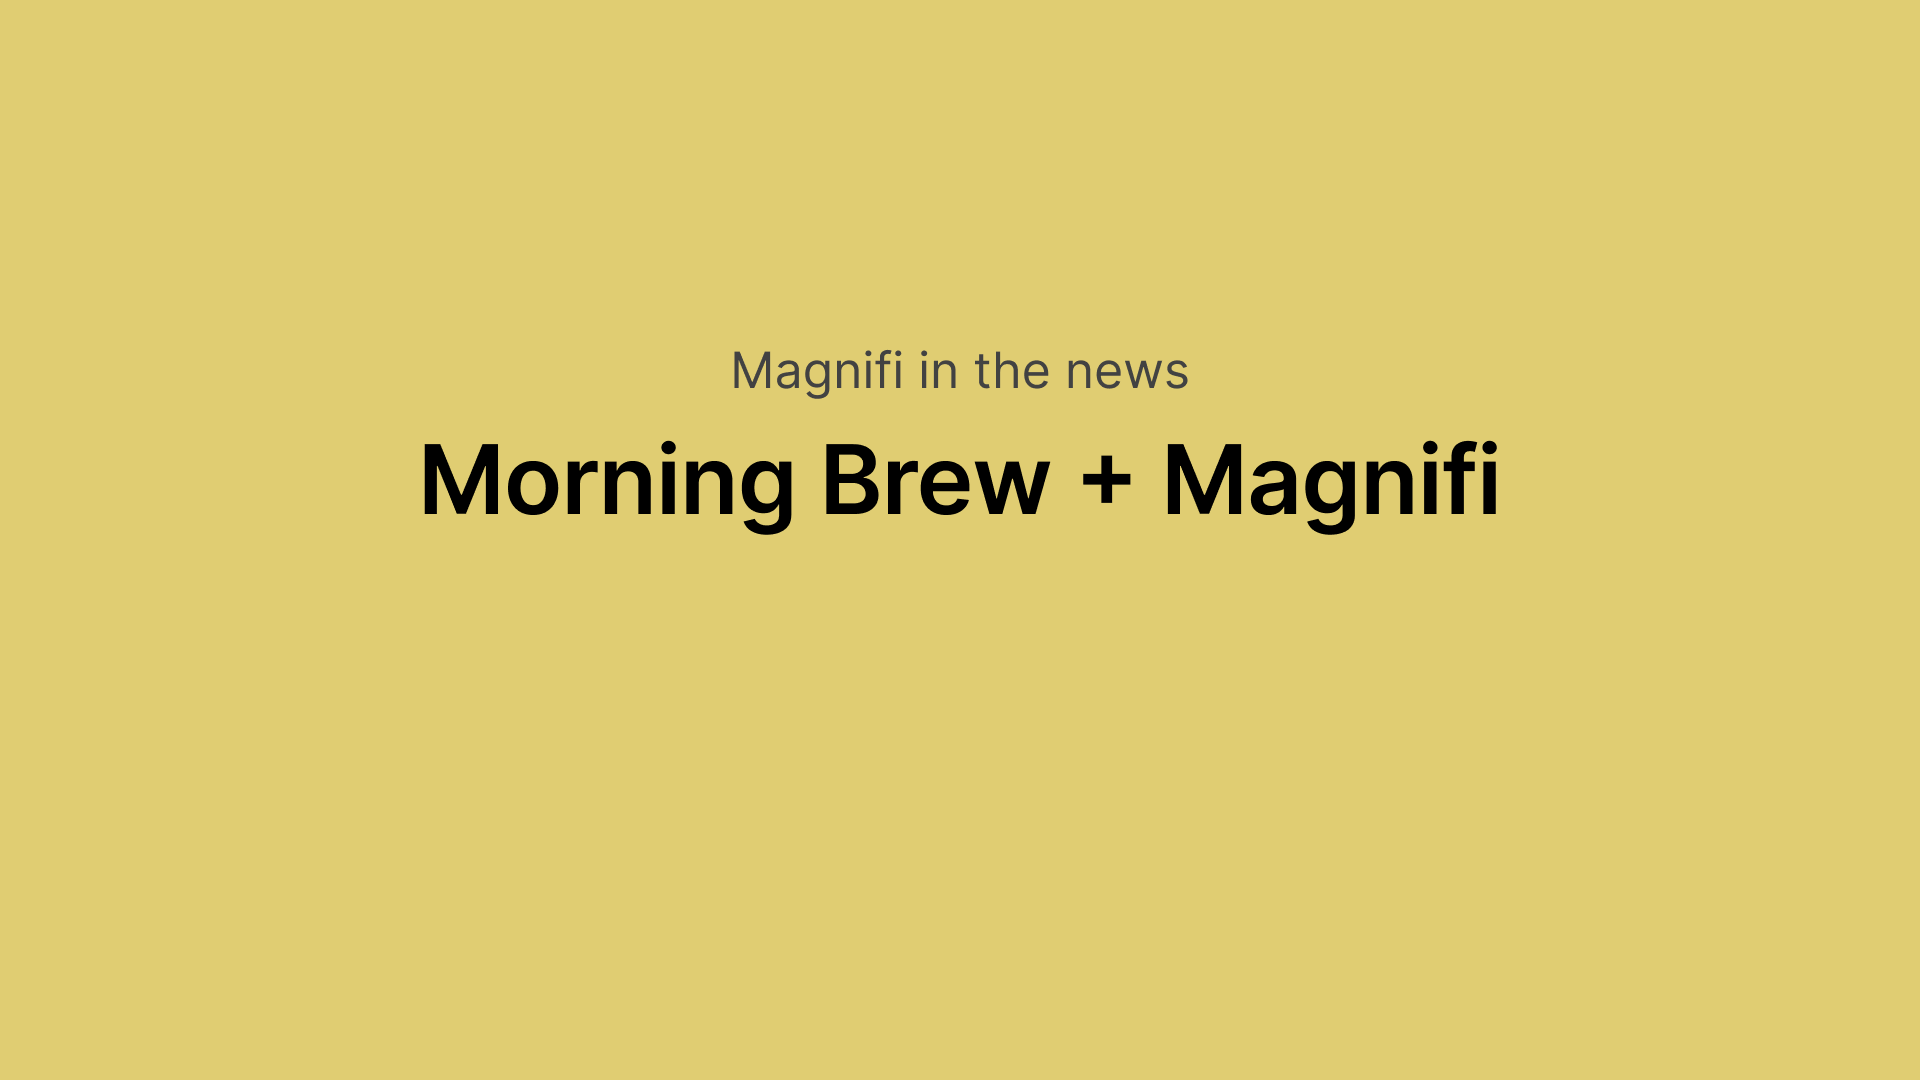 "Magnifi in the news
Morning Brew + Magnifi"